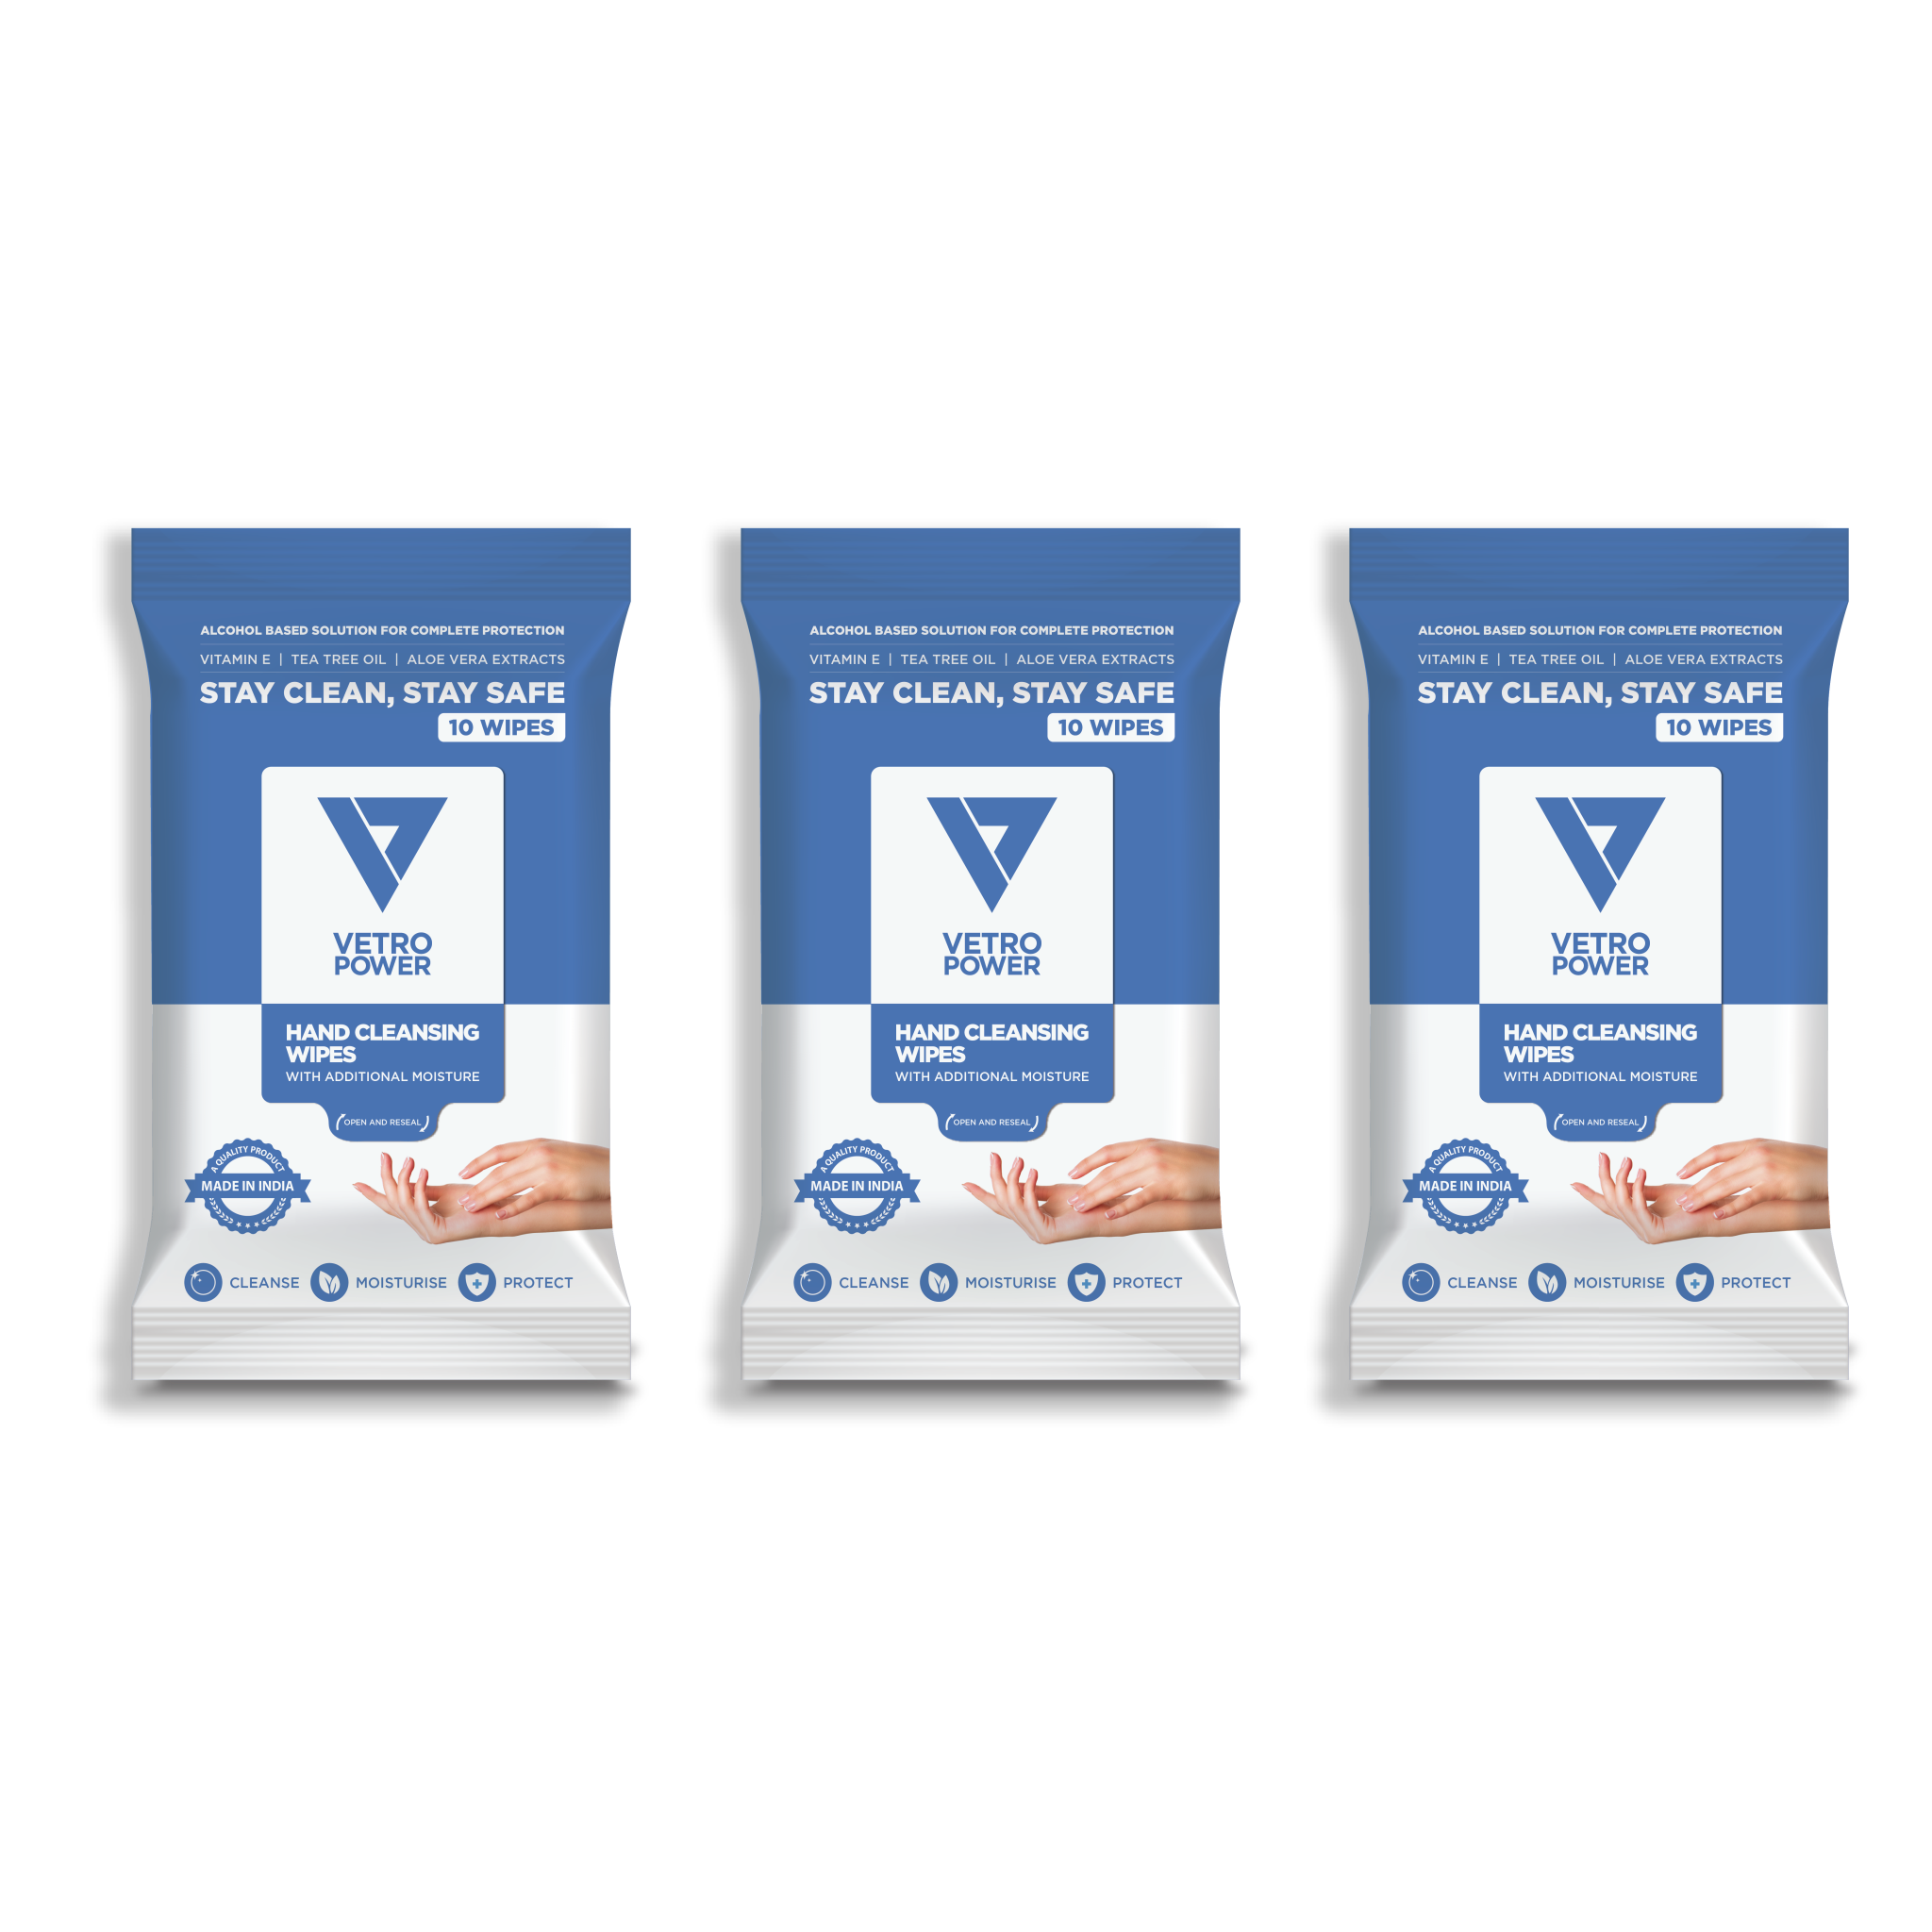 Vetro Power Hand Cleansing Wipes with Aloe Vera, Vitamin E & Tea Tree Oil - 30 Wipes (Pack of 3, 10 each)